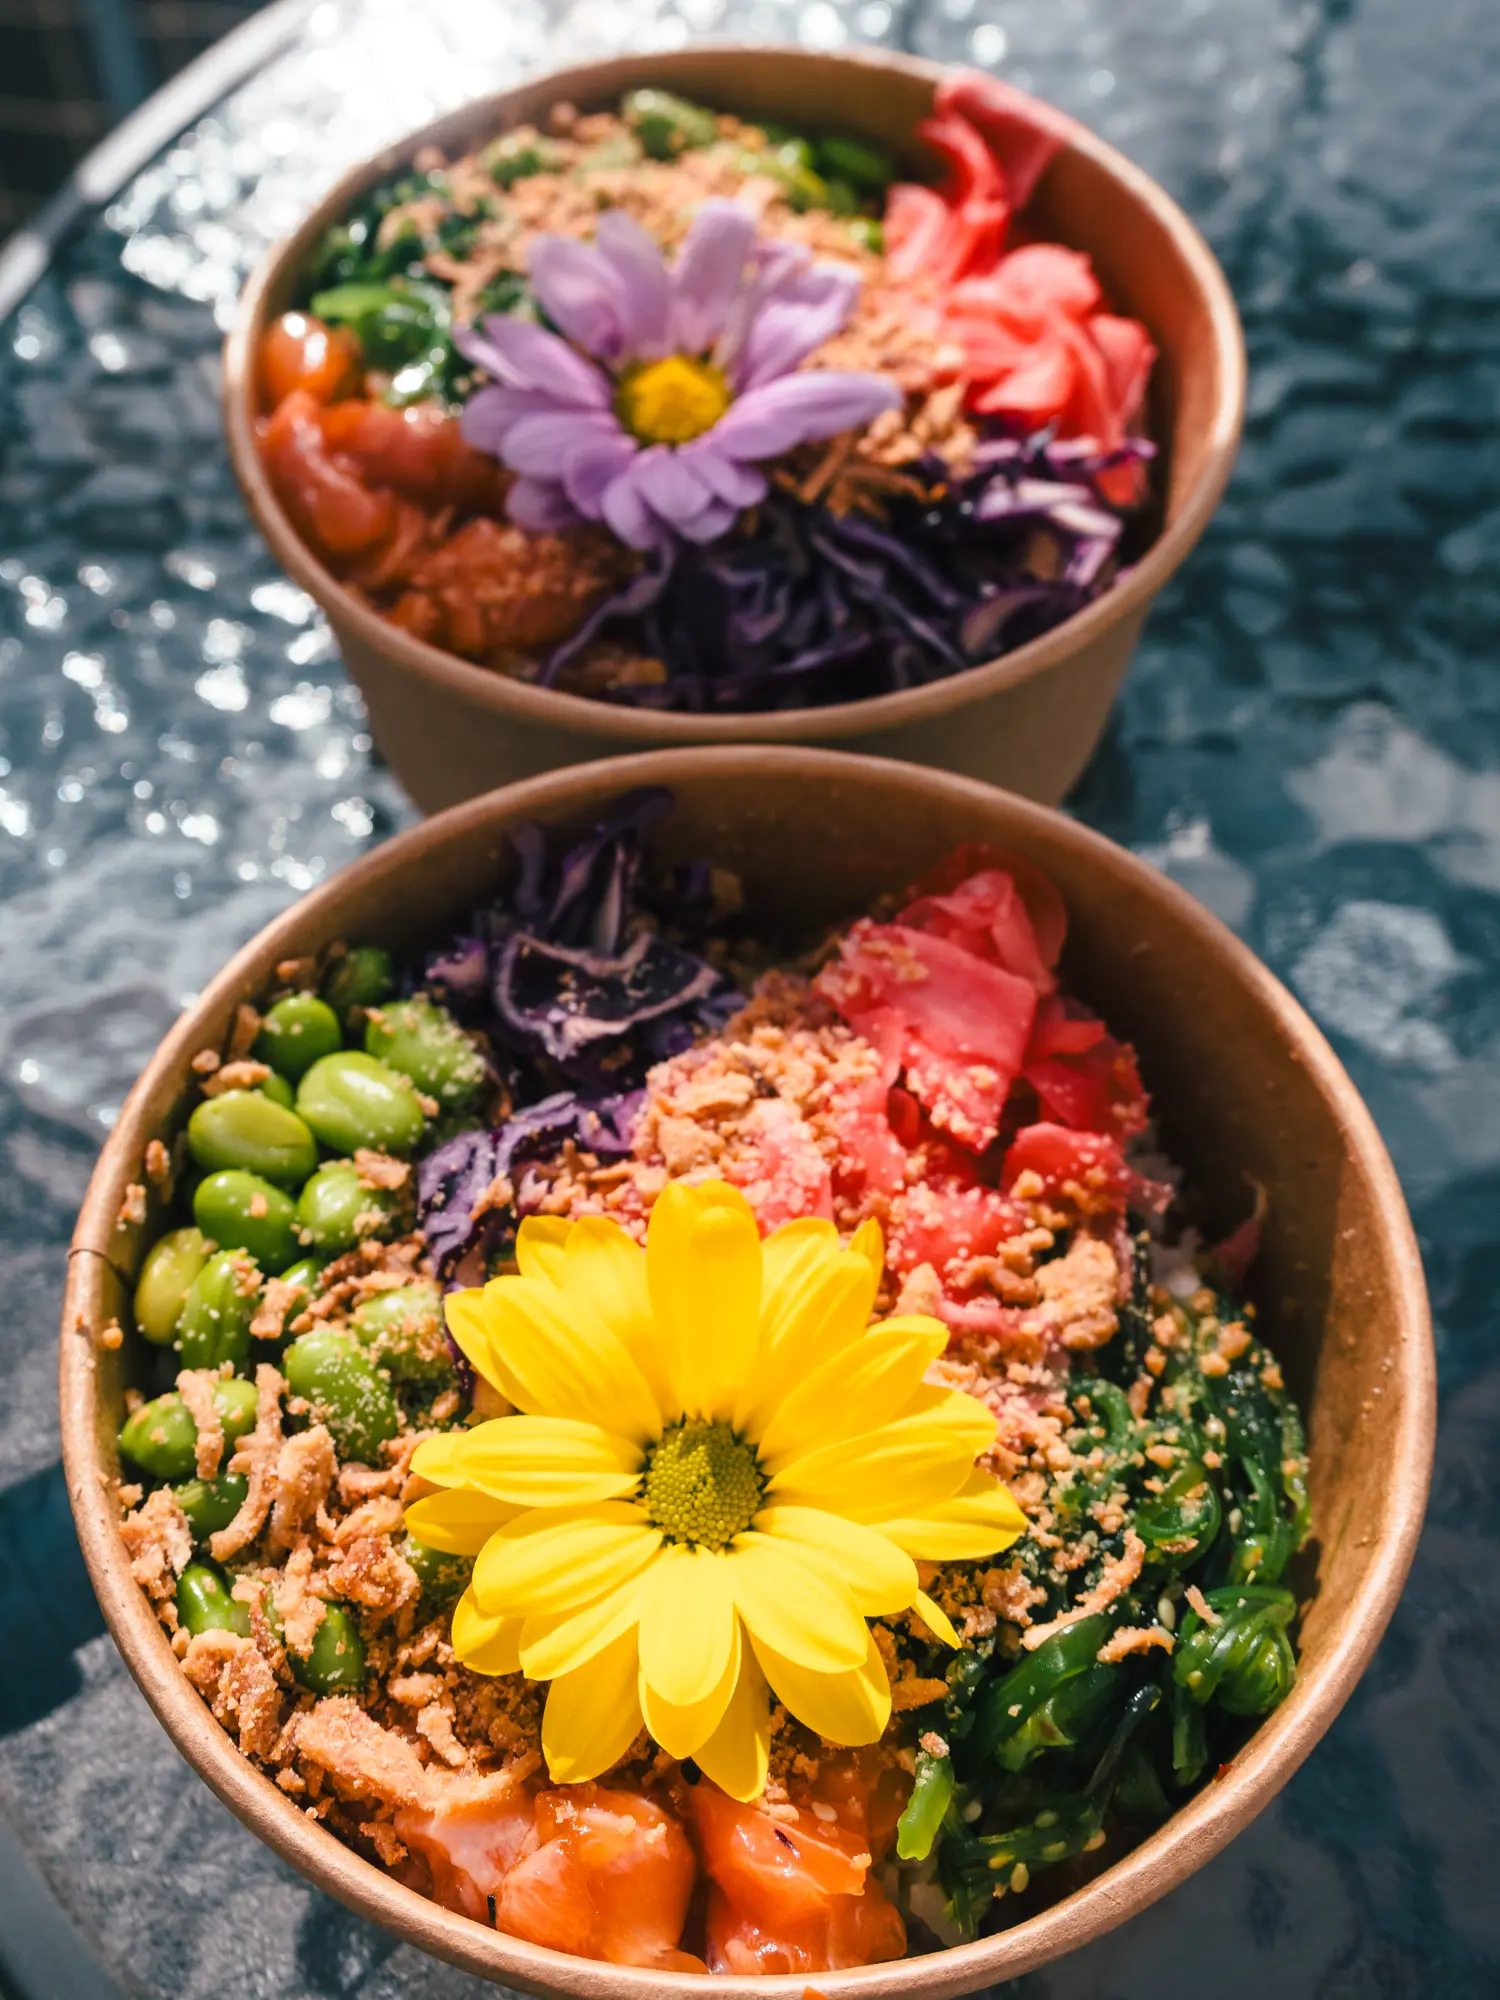 Two poke bowls with edamame, Wakame, salmon, red cabbage, ginger and fried onions, decorated with a yellow and purple flower, from Oké Poké, one of the best restaurants in Krakow.